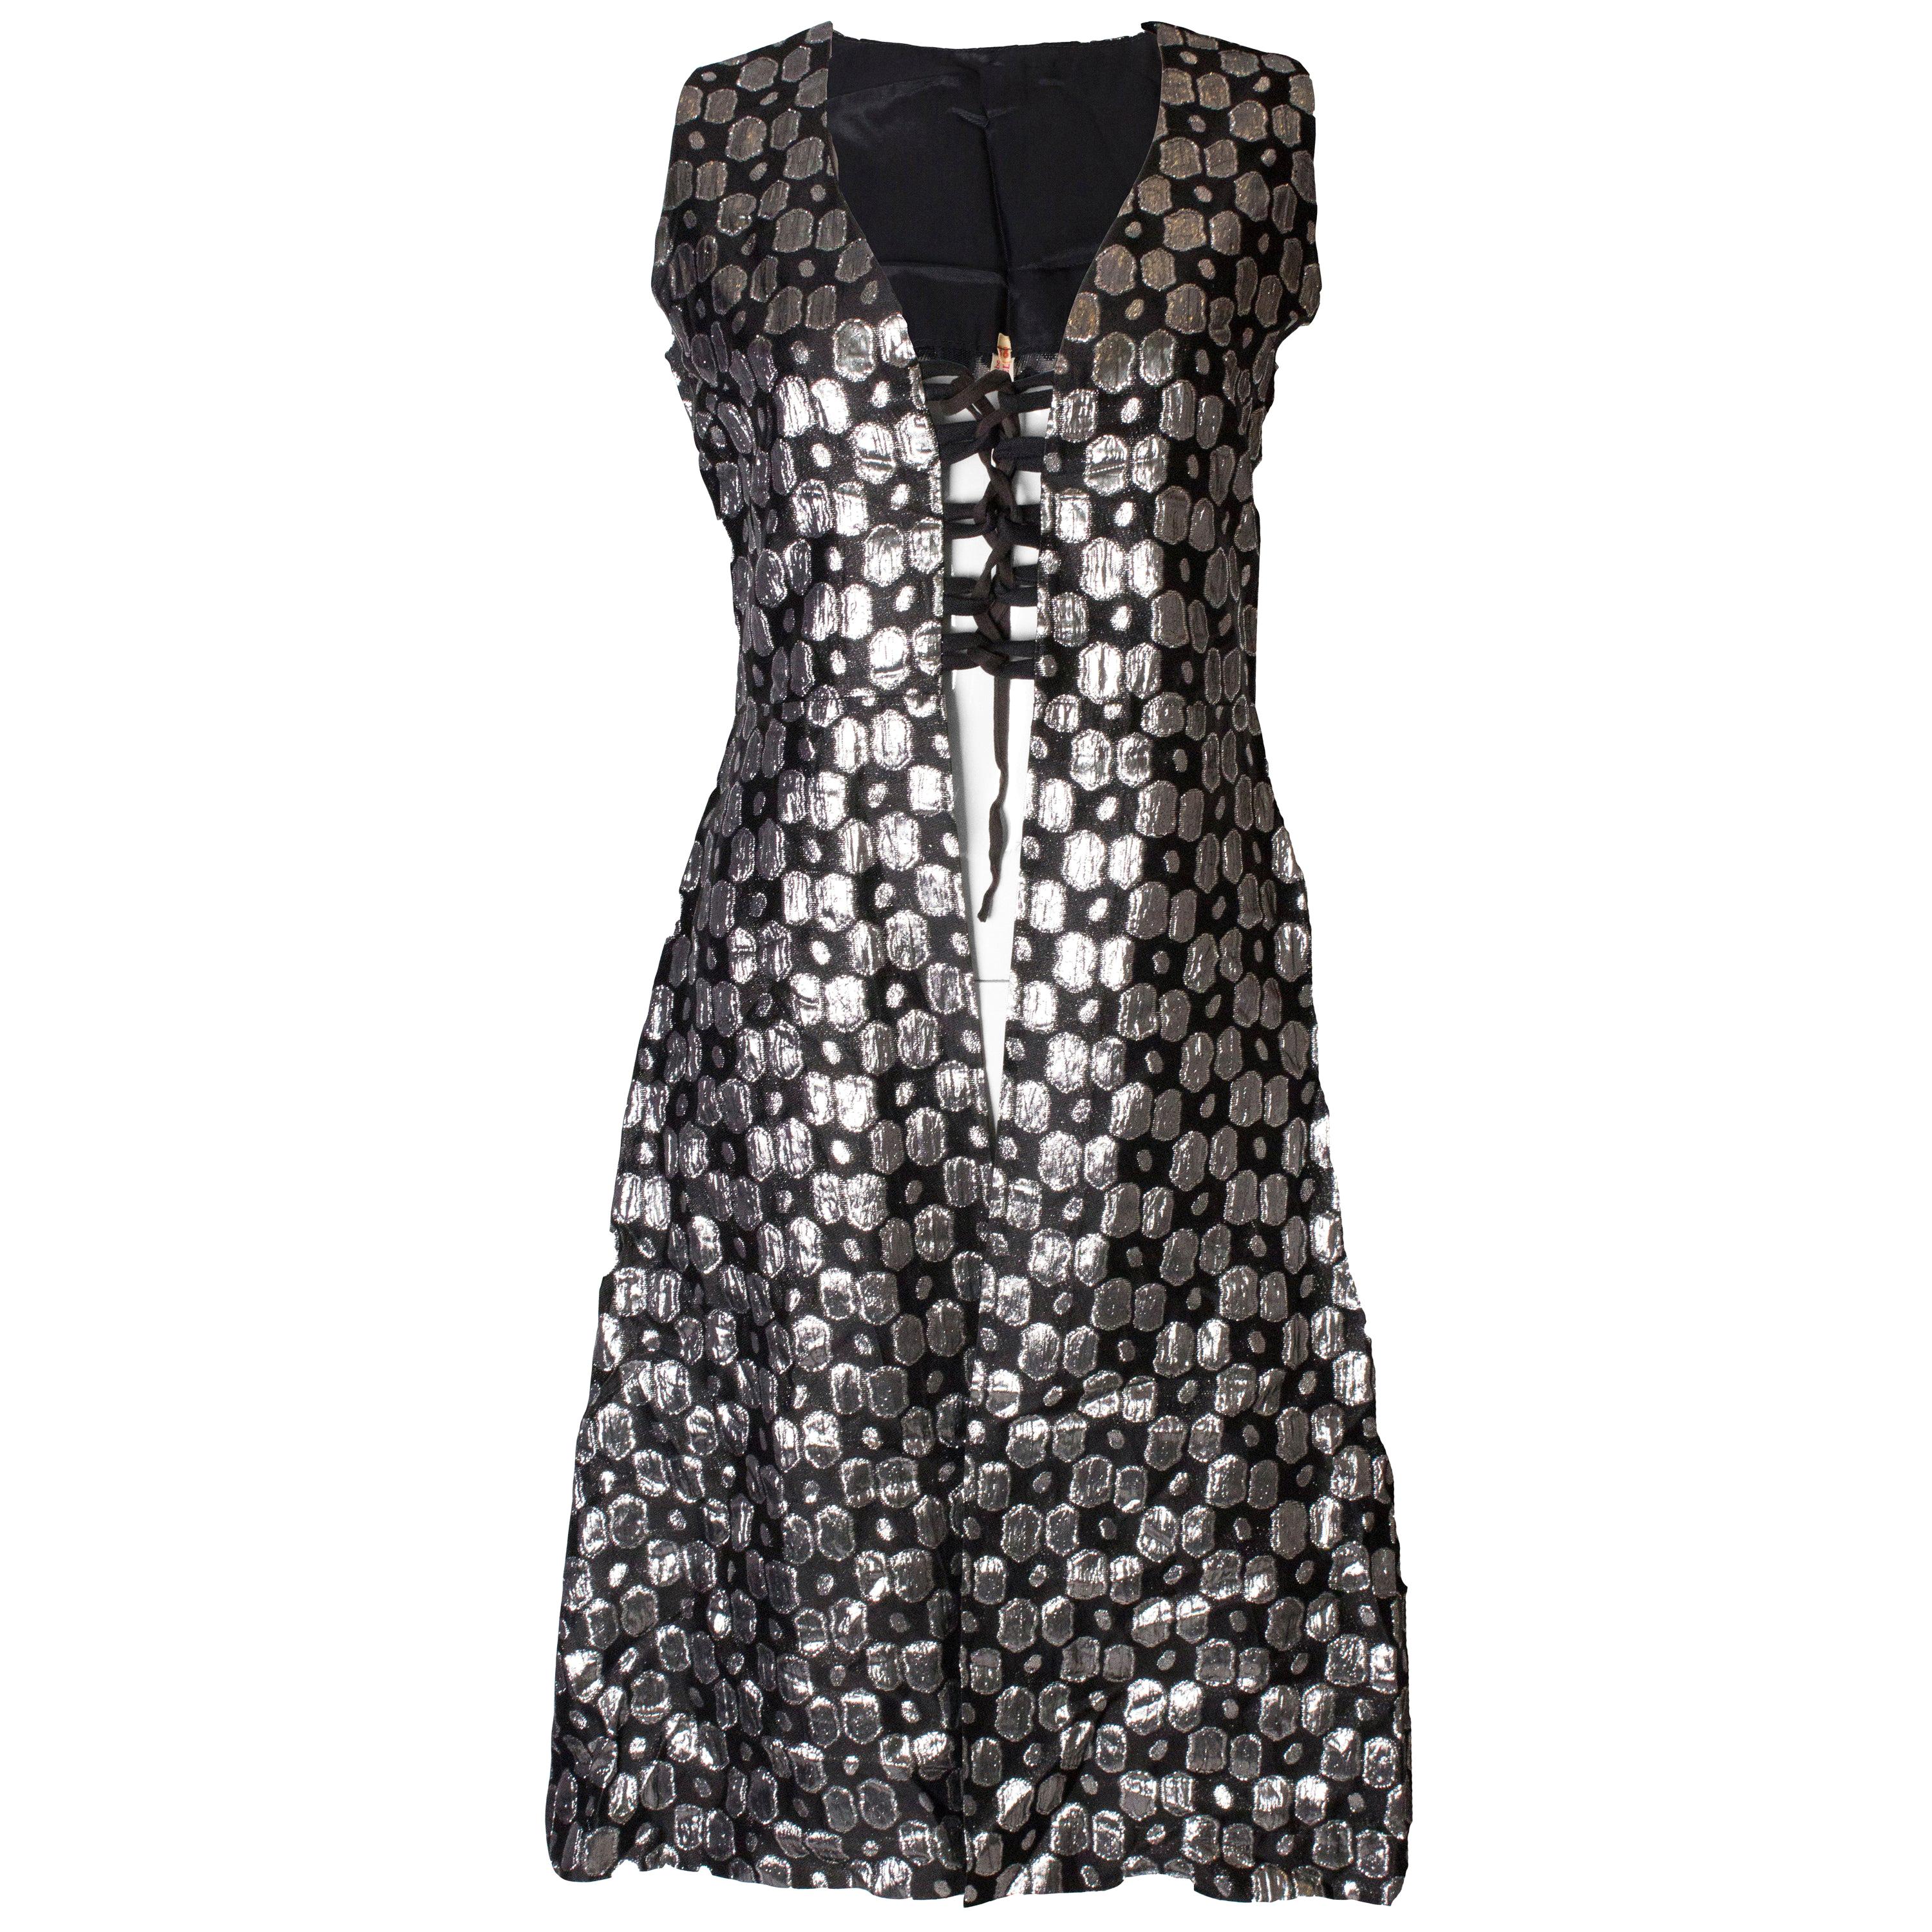 A Vintage 1960s Silver and Black Waistcoat /Mini Dress For Sale at 1stDibs